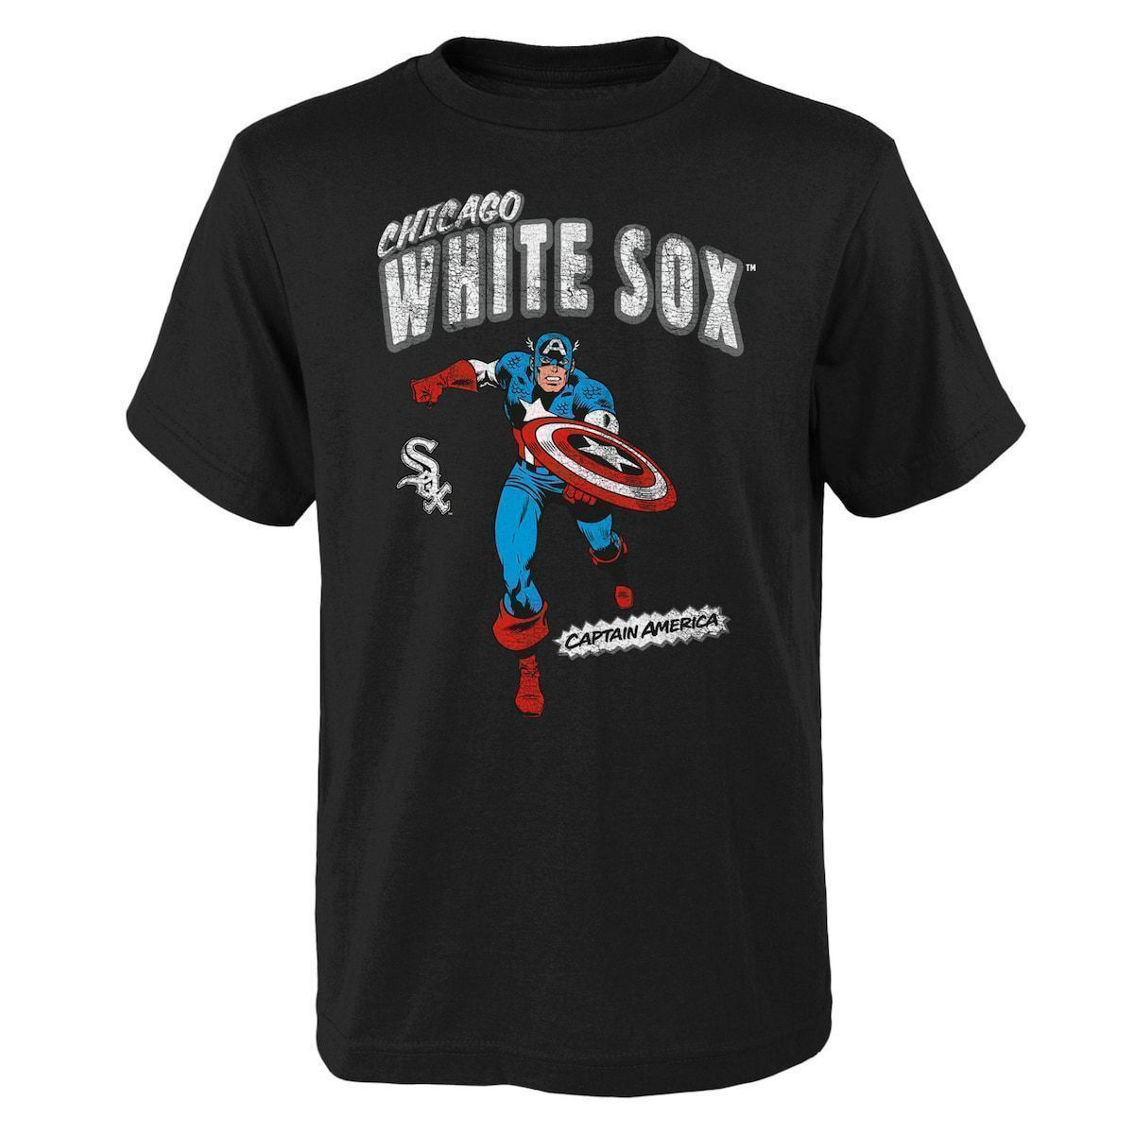 Outerstuff Youth Black Chicago White Sox Team Captain America Marvel T-Shirt - Image 2 of 2